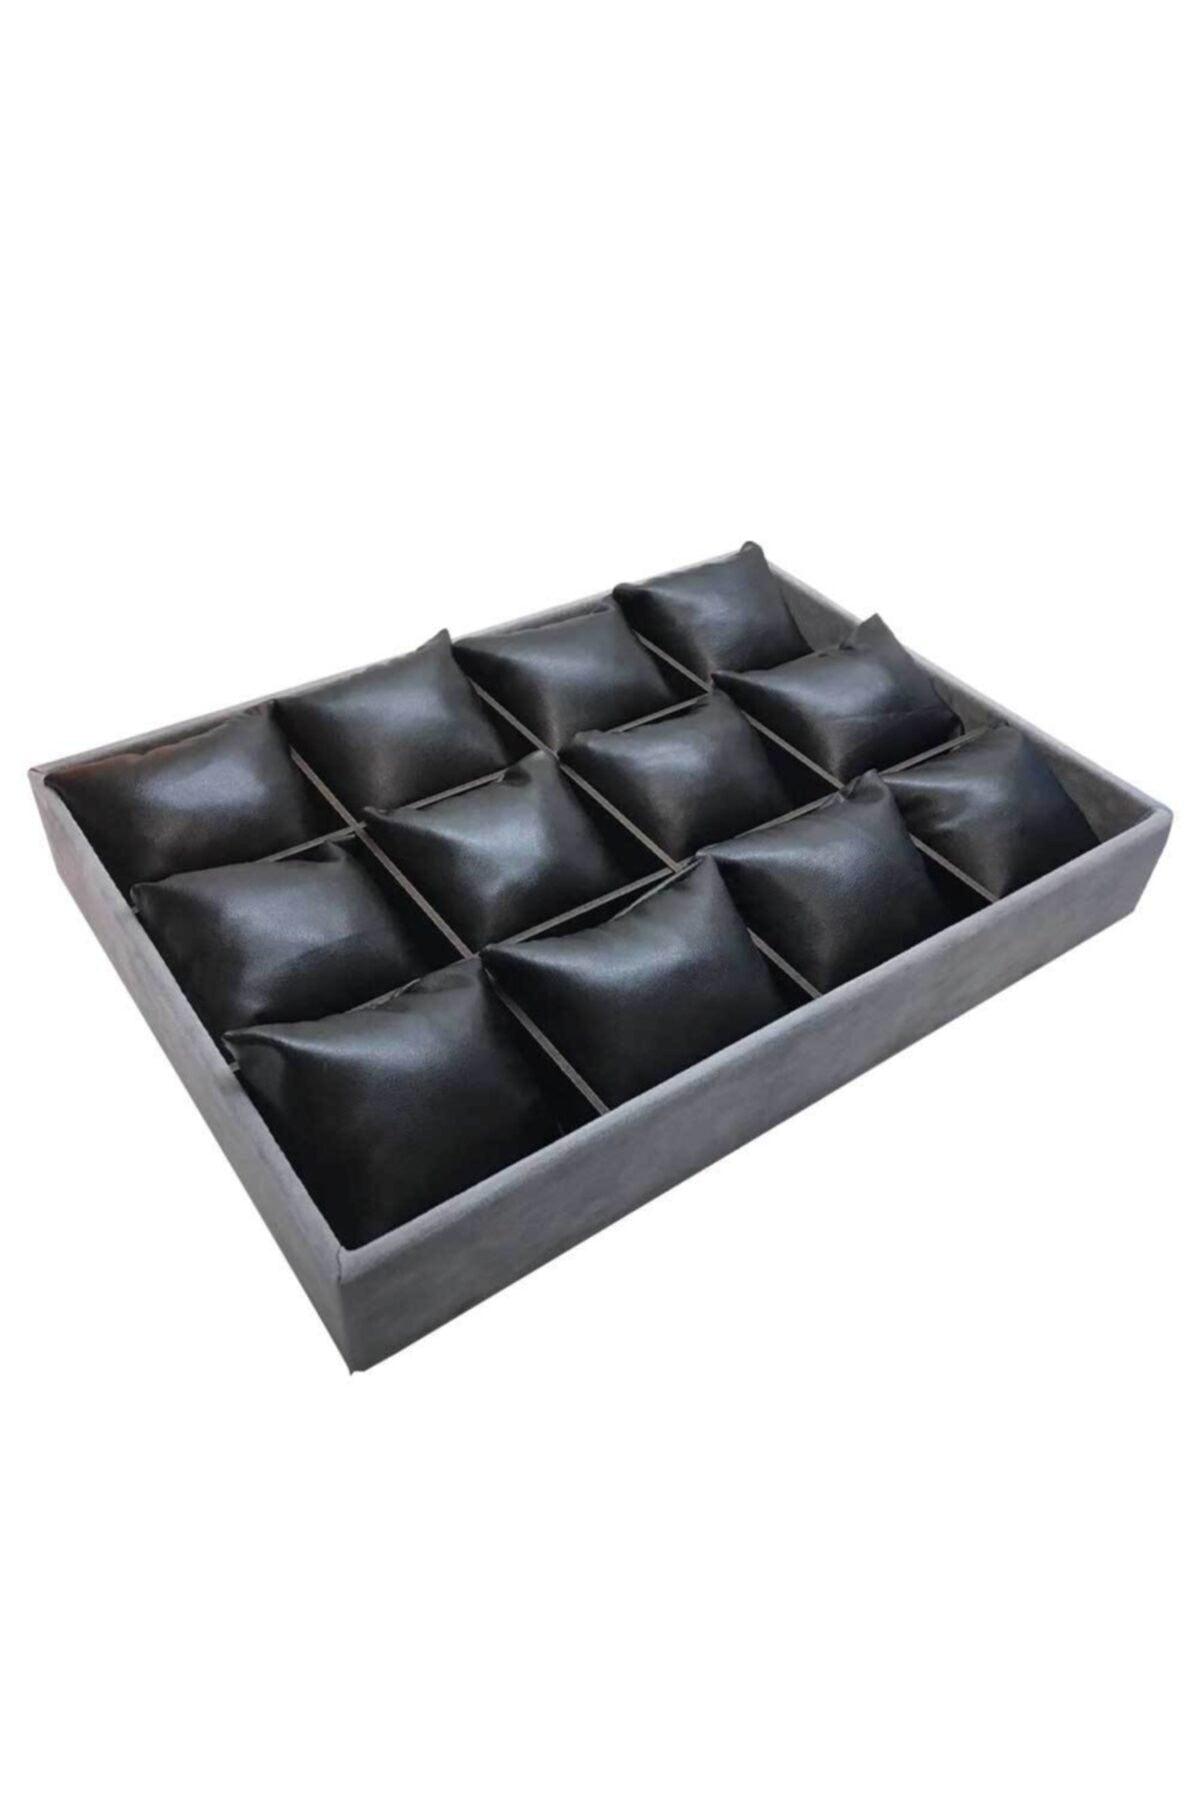 12 Drawer Inside Local Gray Suede Covered Leather Padded Watch Bracelet Box Stand - Swordslife